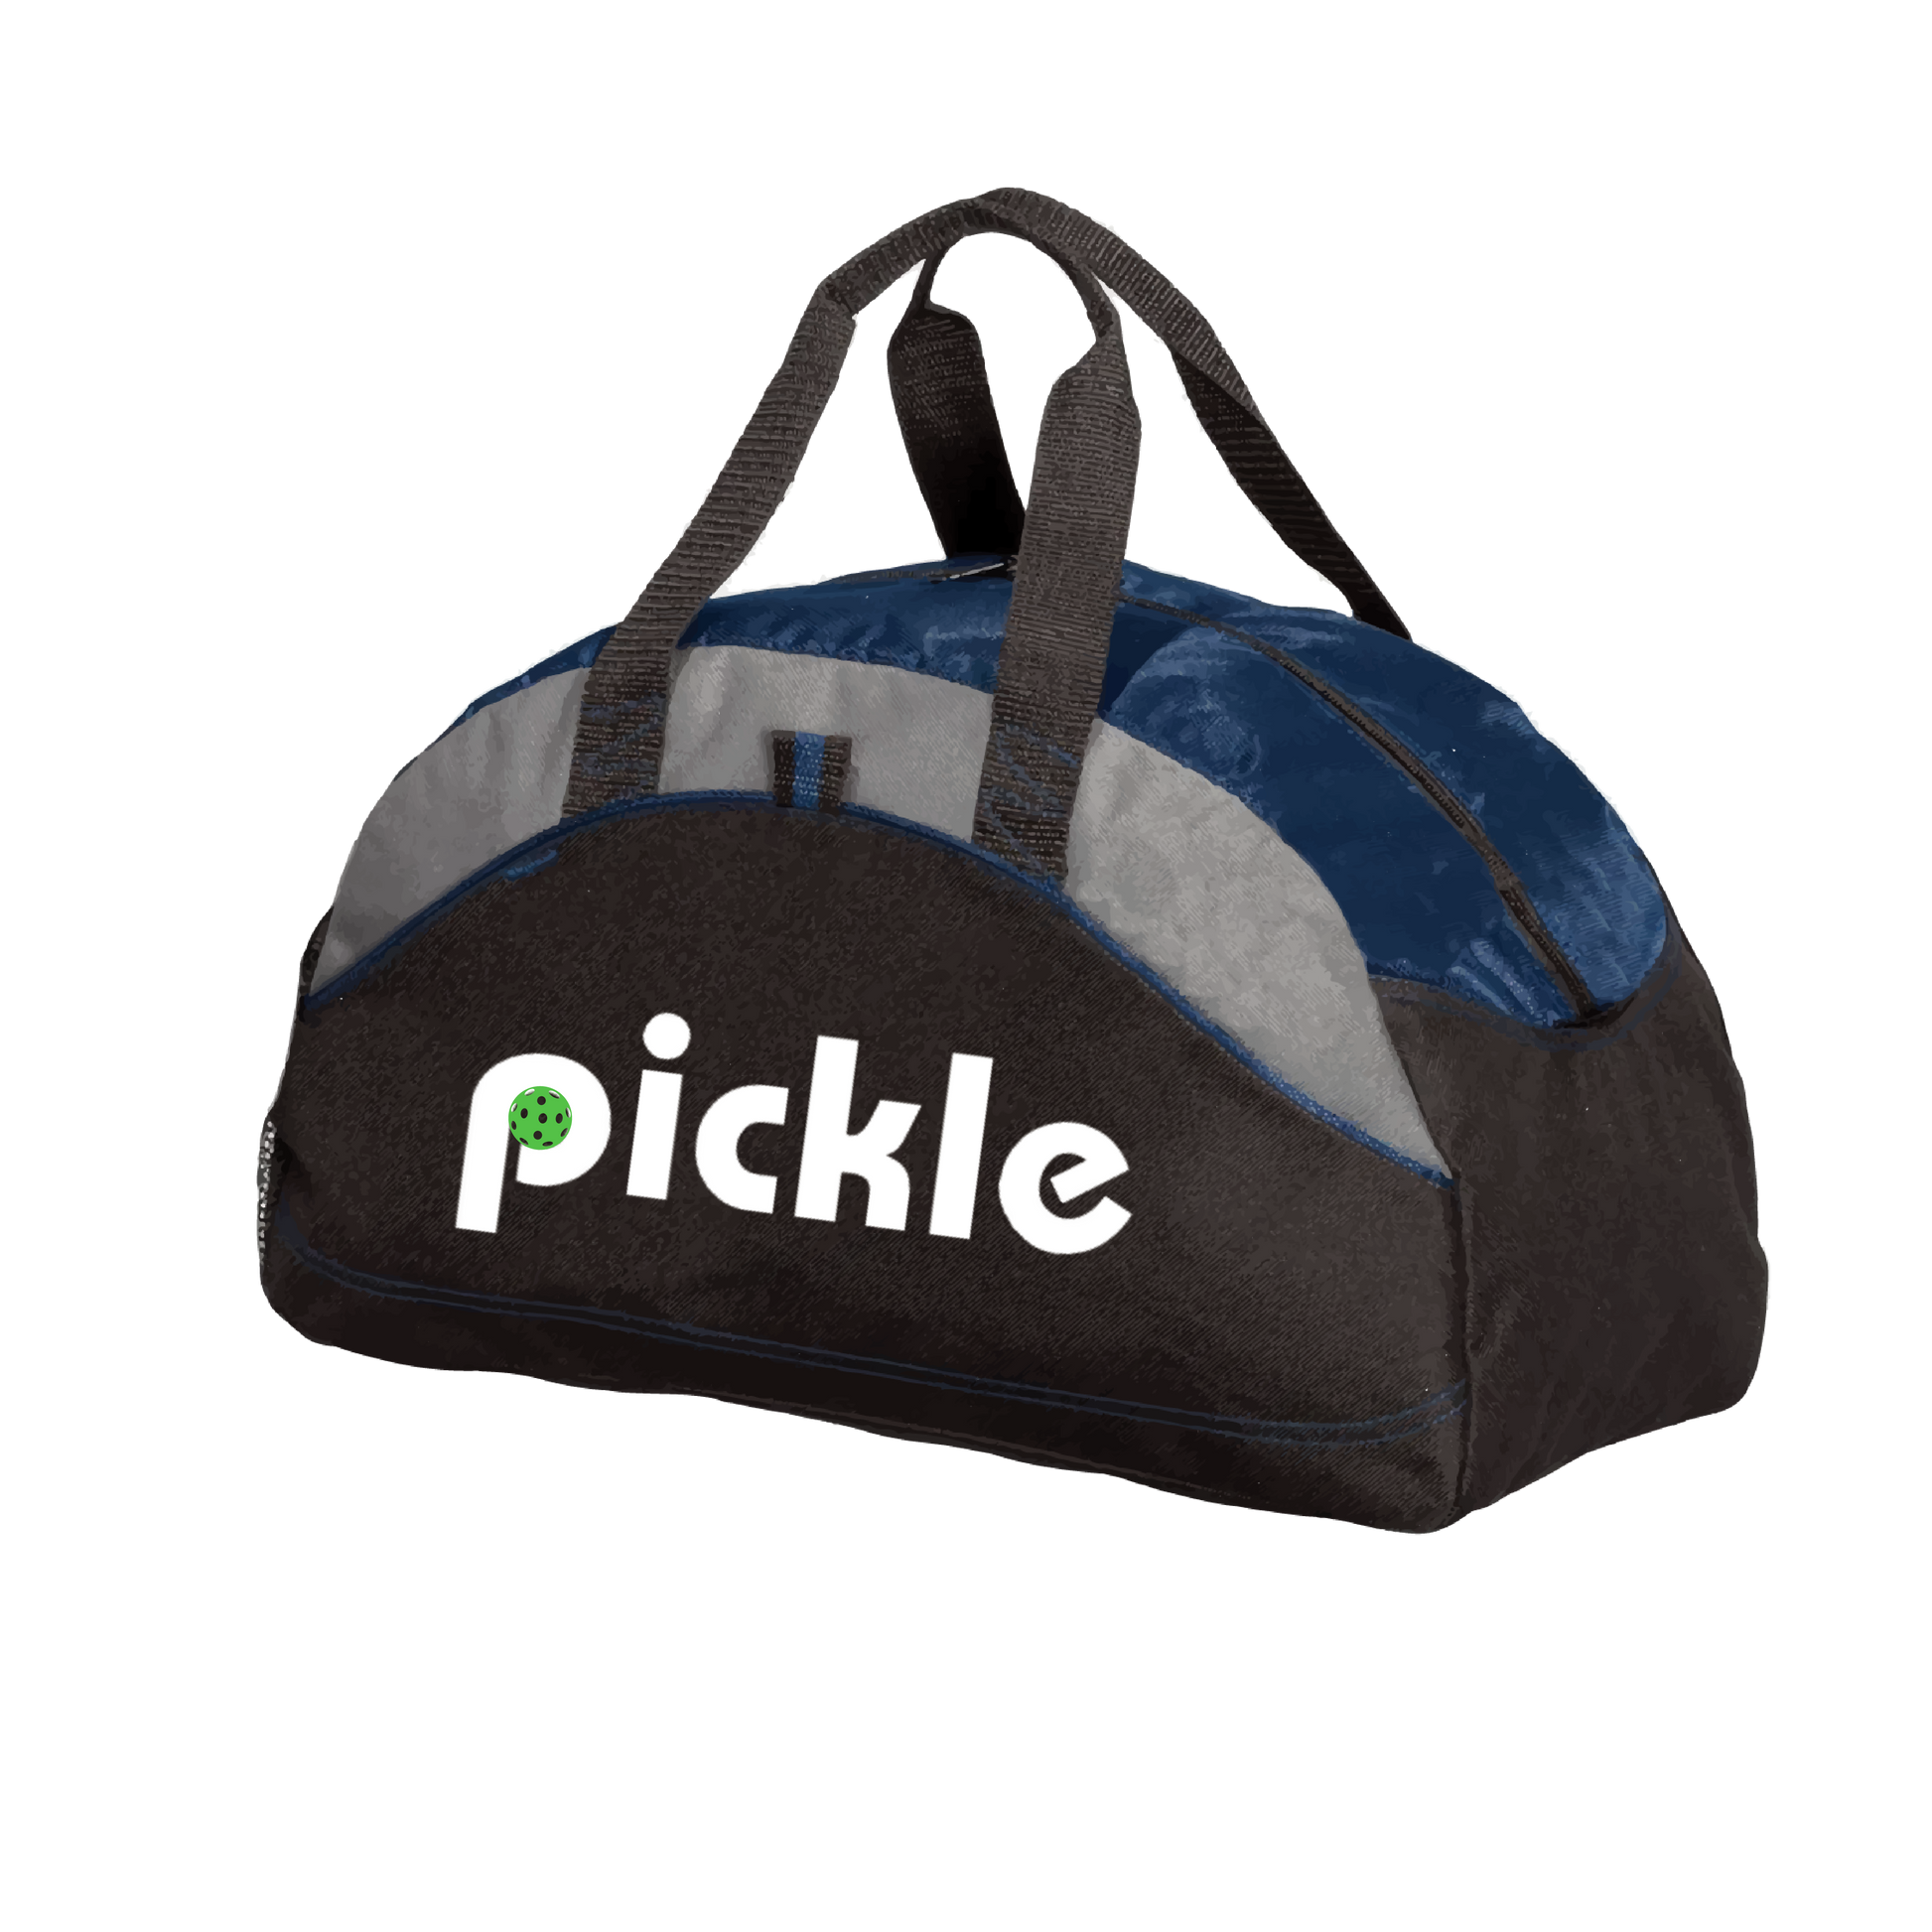 Carry your gear in comfort and style. This fun pickleball duffel bag is the perfect accessory for all pickleball players needing to keep their gear in one place. This medium sized duffel tote is ideal for all your pickleball activities. The large center compartment allows for plenty of space and the mesh end pocket is perfect for holding a water bottle. Duffel bag comes with an adjustable shoulder strap and the polyester material is durable and easily cleaned.